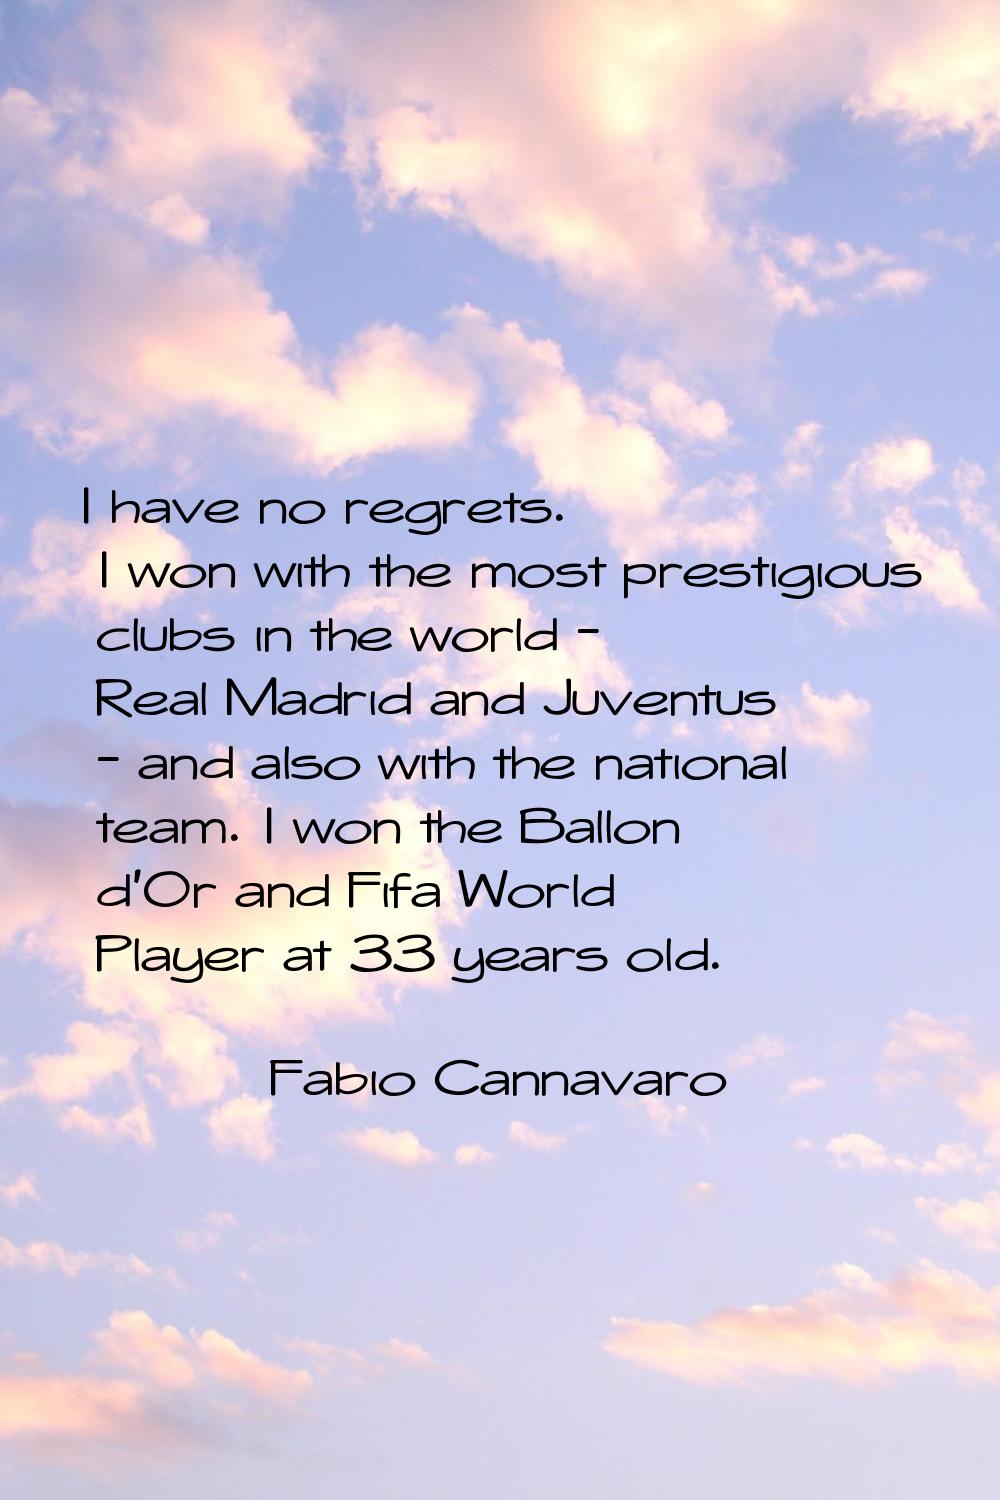 I have no regrets. I won with the most prestigious clubs in the world - Real Madrid and Juventus - 